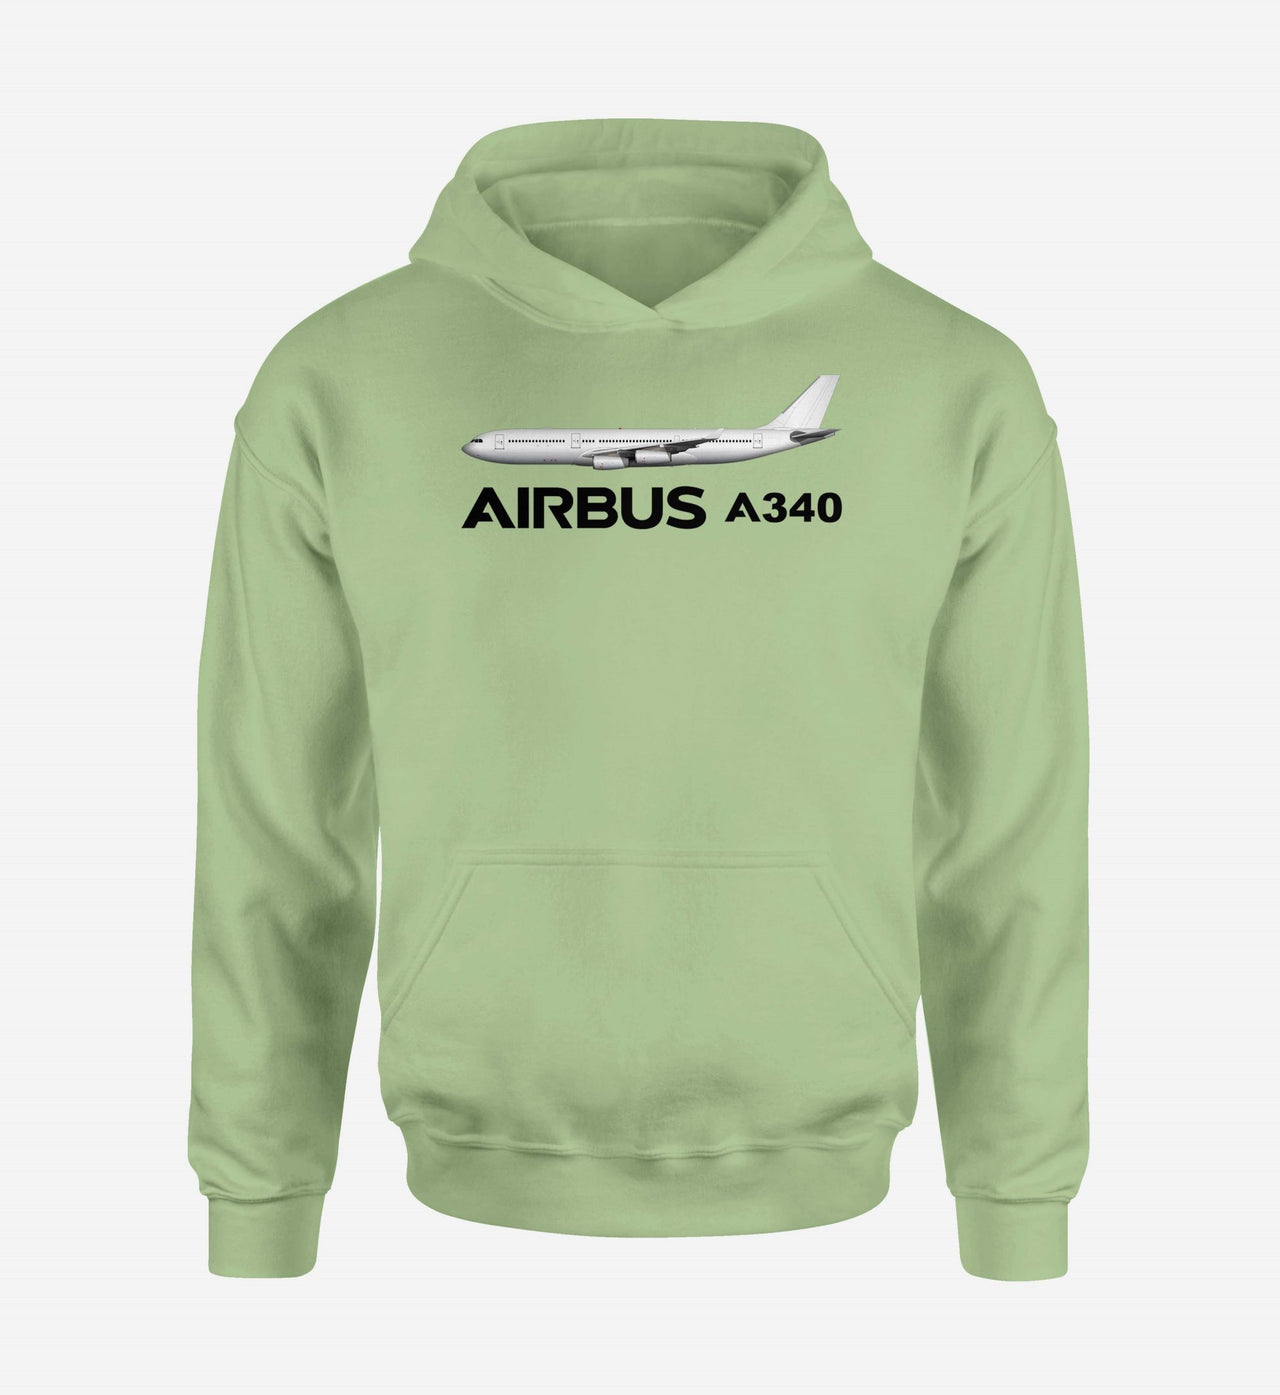 The Airbus A340 Designed Hoodies